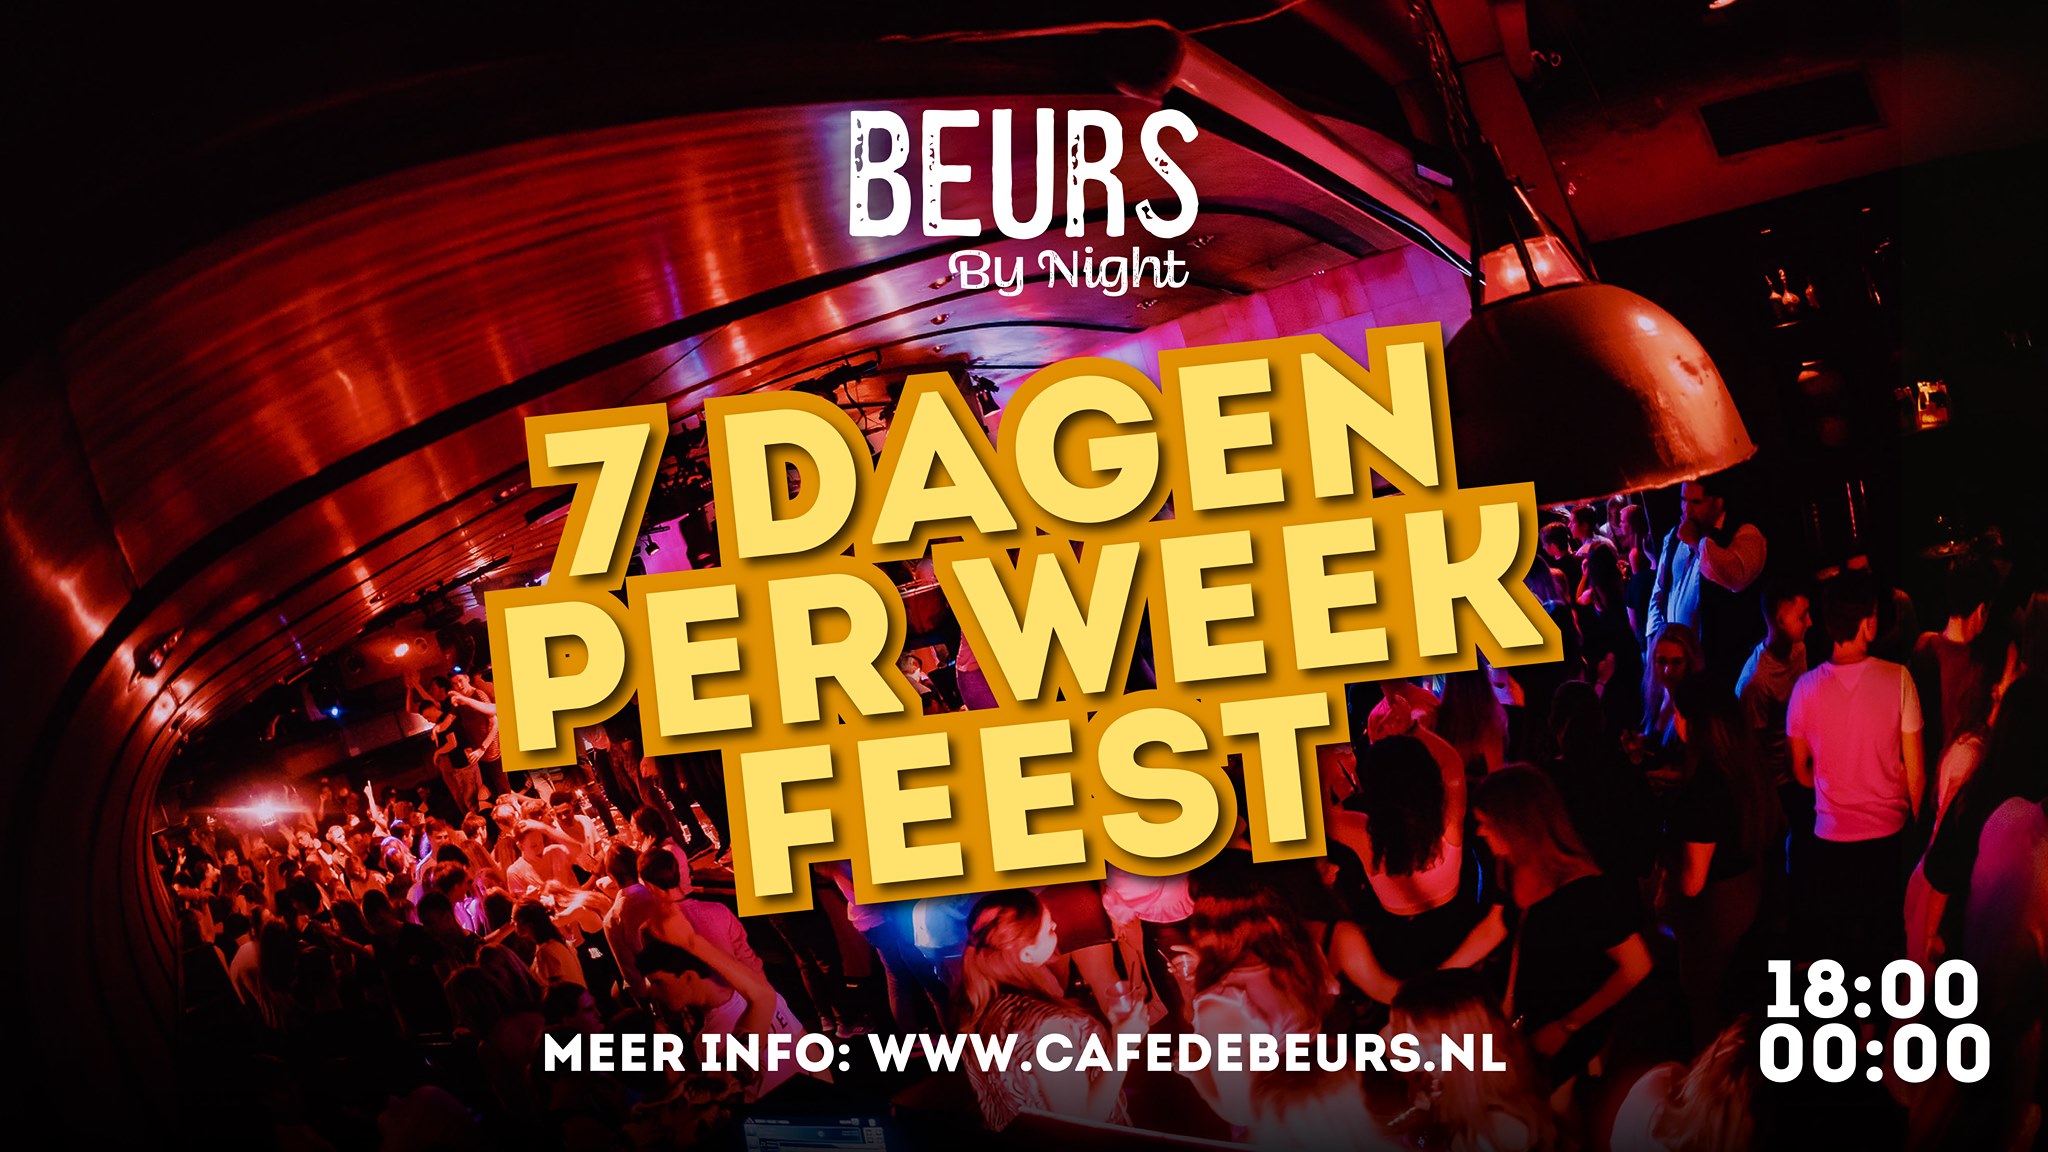 Beurs By Night - Every Sunday